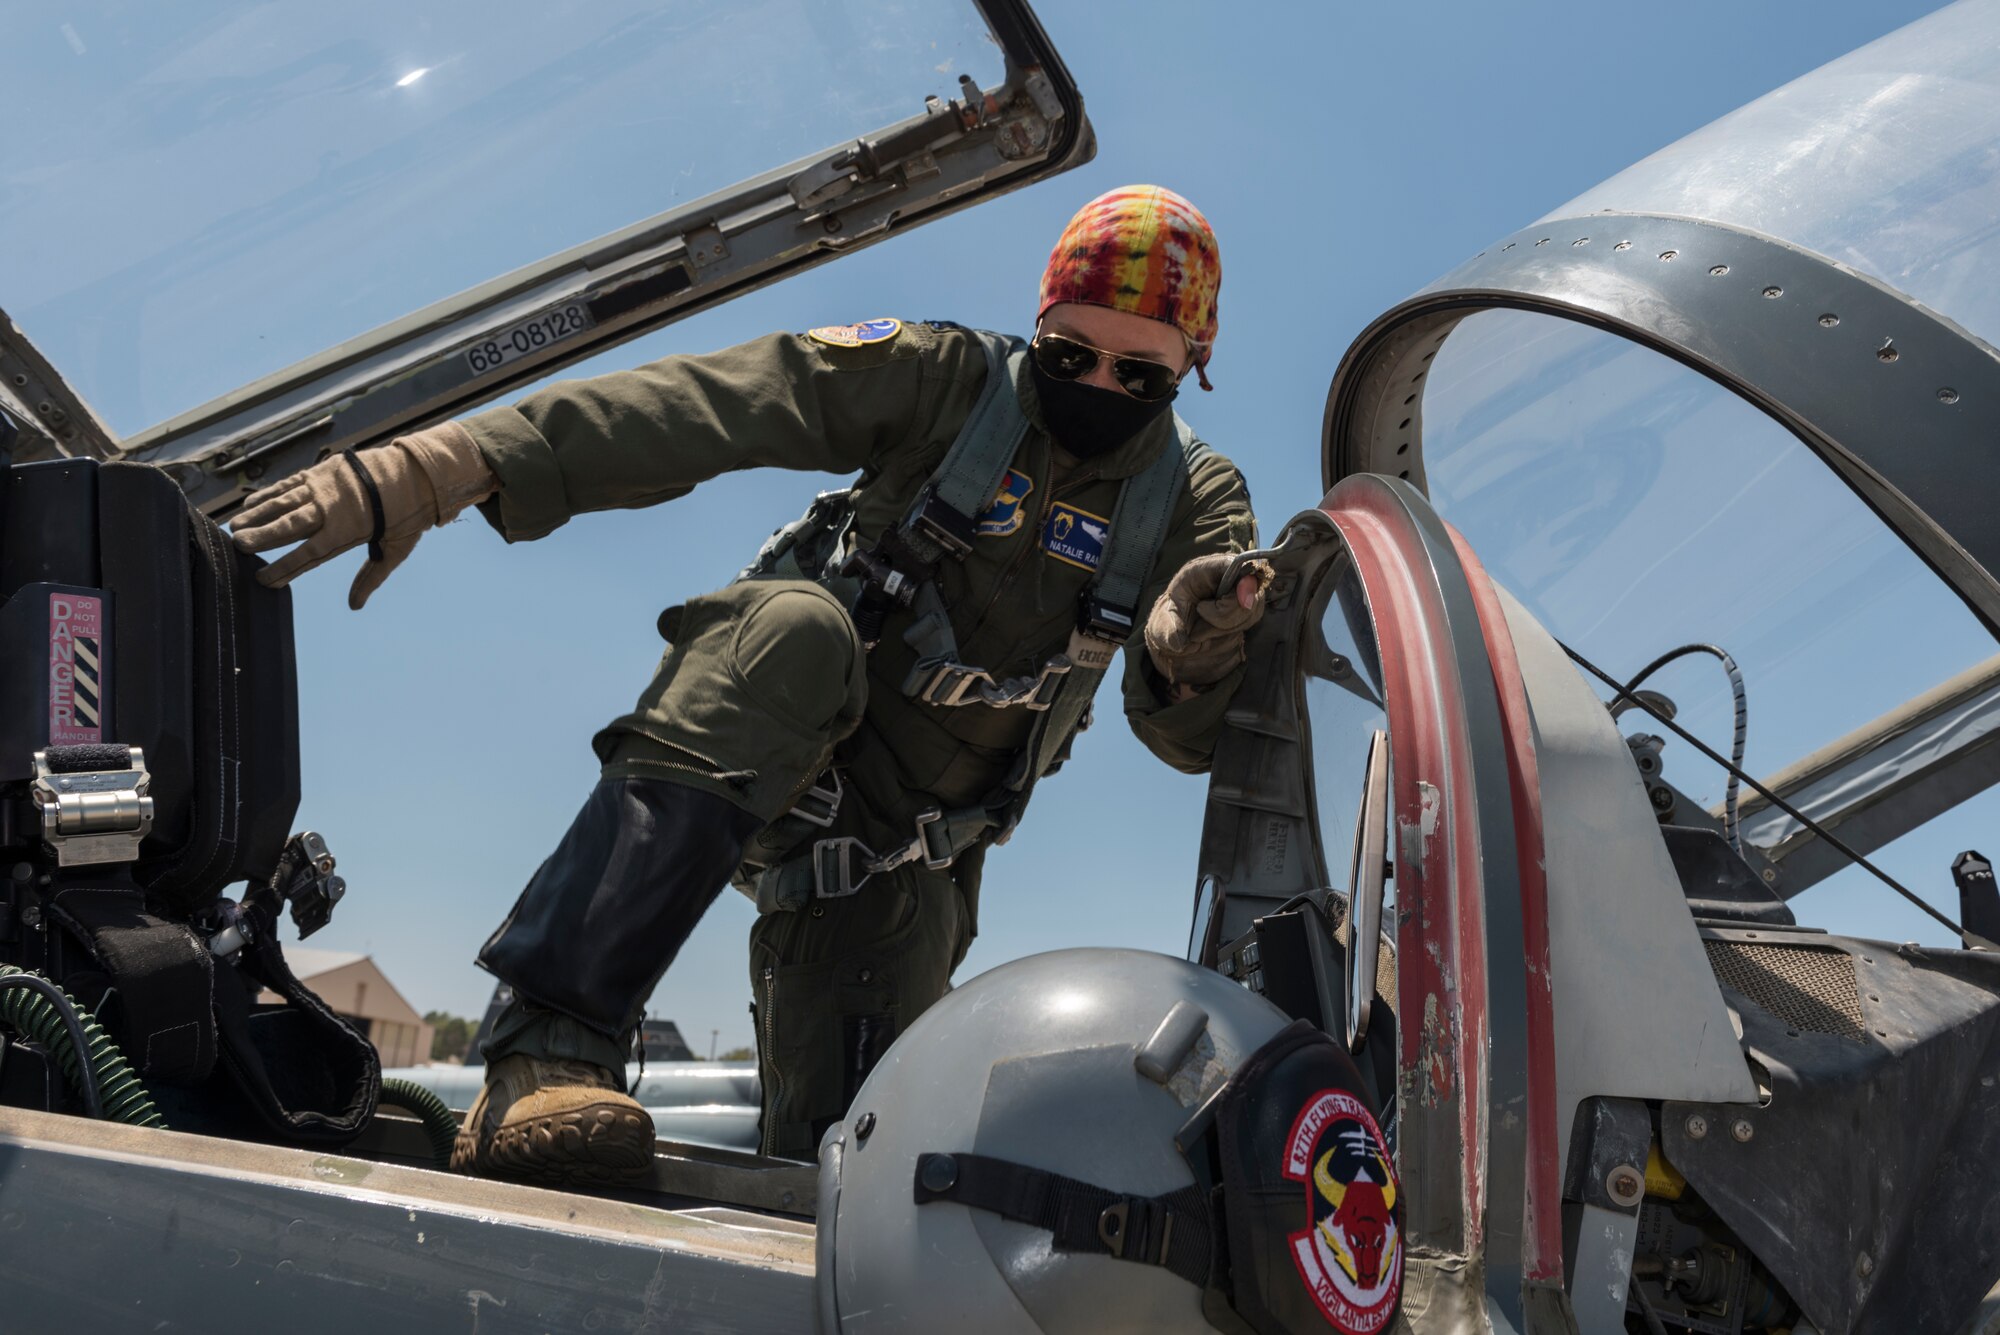 Captain Natalie Rambish, 47th Operations Support Squadron aircrew and flight equipment commander and instructor pilot, climbs into her seat in a T-38C Talon as she prepares to fly with a student pilot, Aug. 11, 2020 at Laughlin Air Force Base, Texas. She is a member of Laughlin’s Female Aviators’ Mentorship Group because she loves the camaraderie and the chance to find other women aviators who she can look up to. (U.S. Air Force photo by Senior Airman Anne McCready)